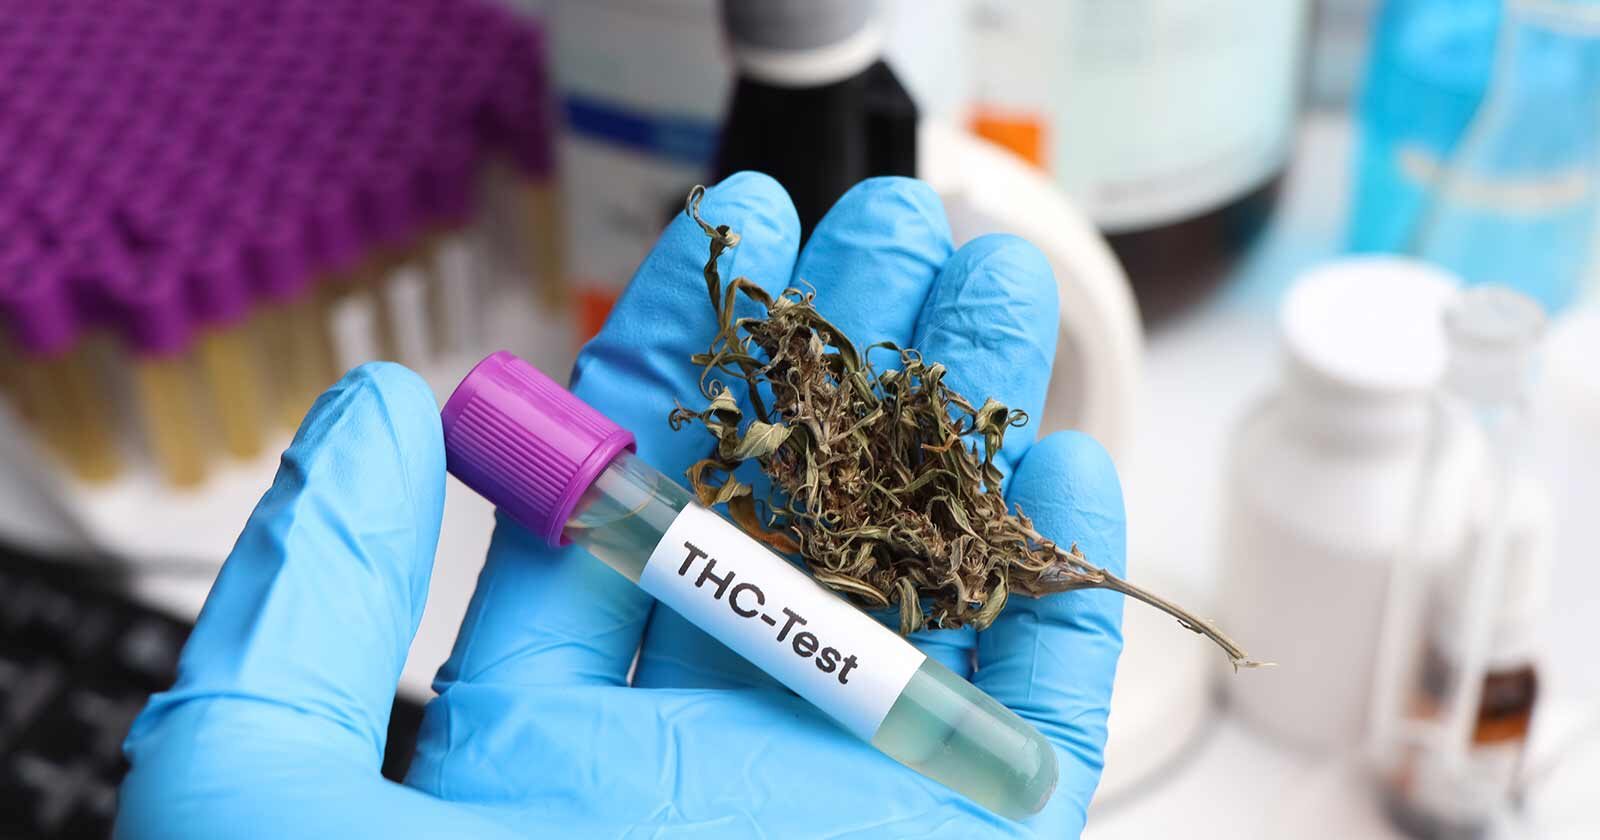 thc metabolites released weeks after using